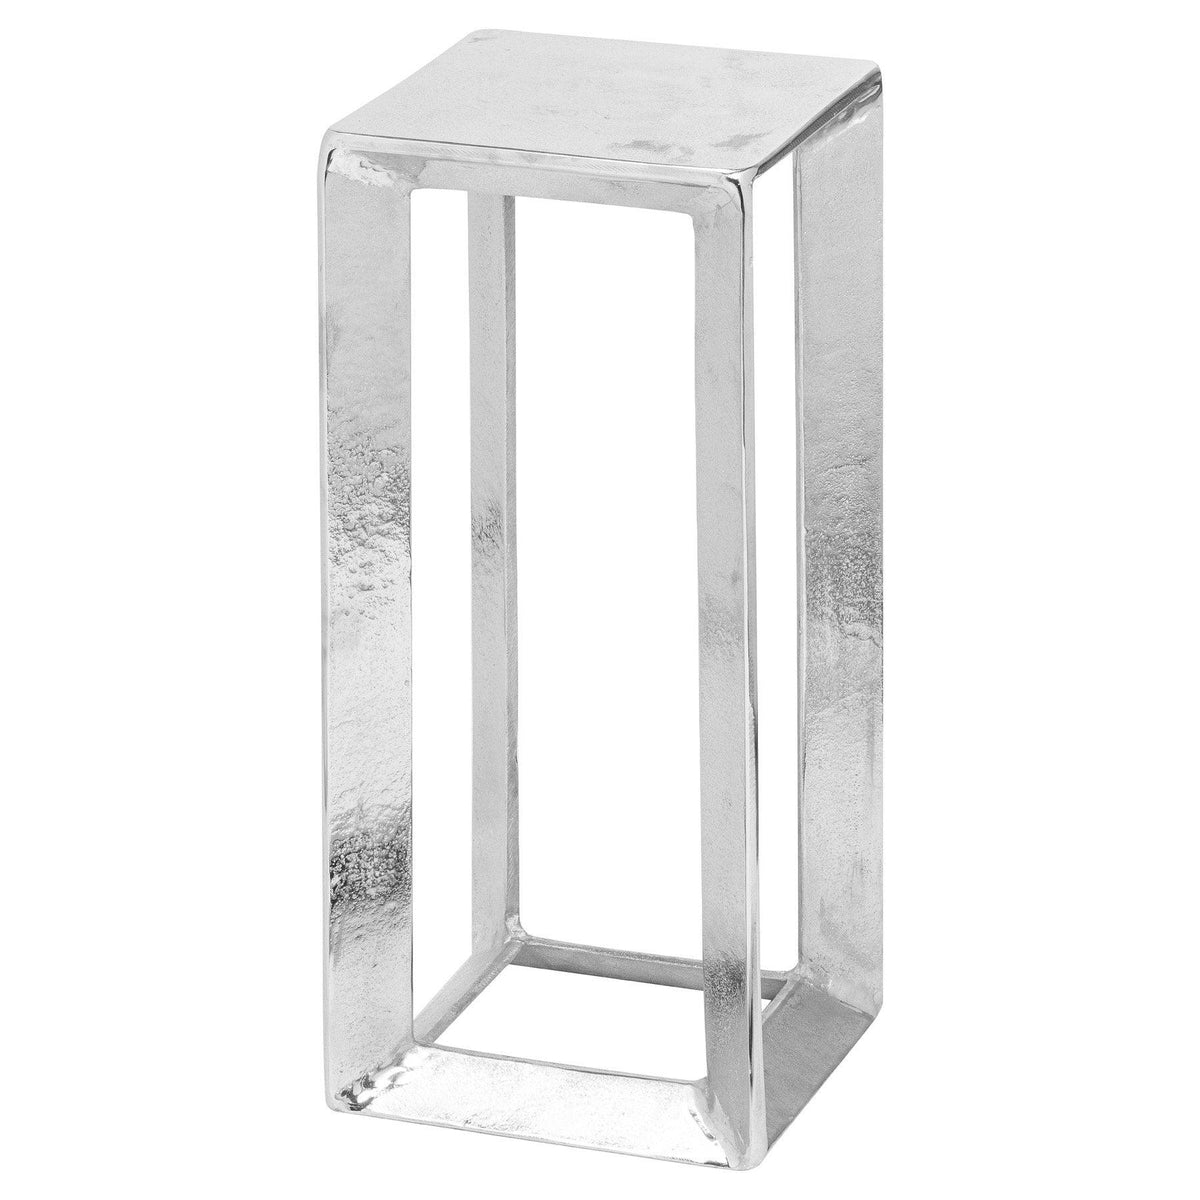 Farrah Collection Small Silver Plant Stand - Vookoo Lifestyle